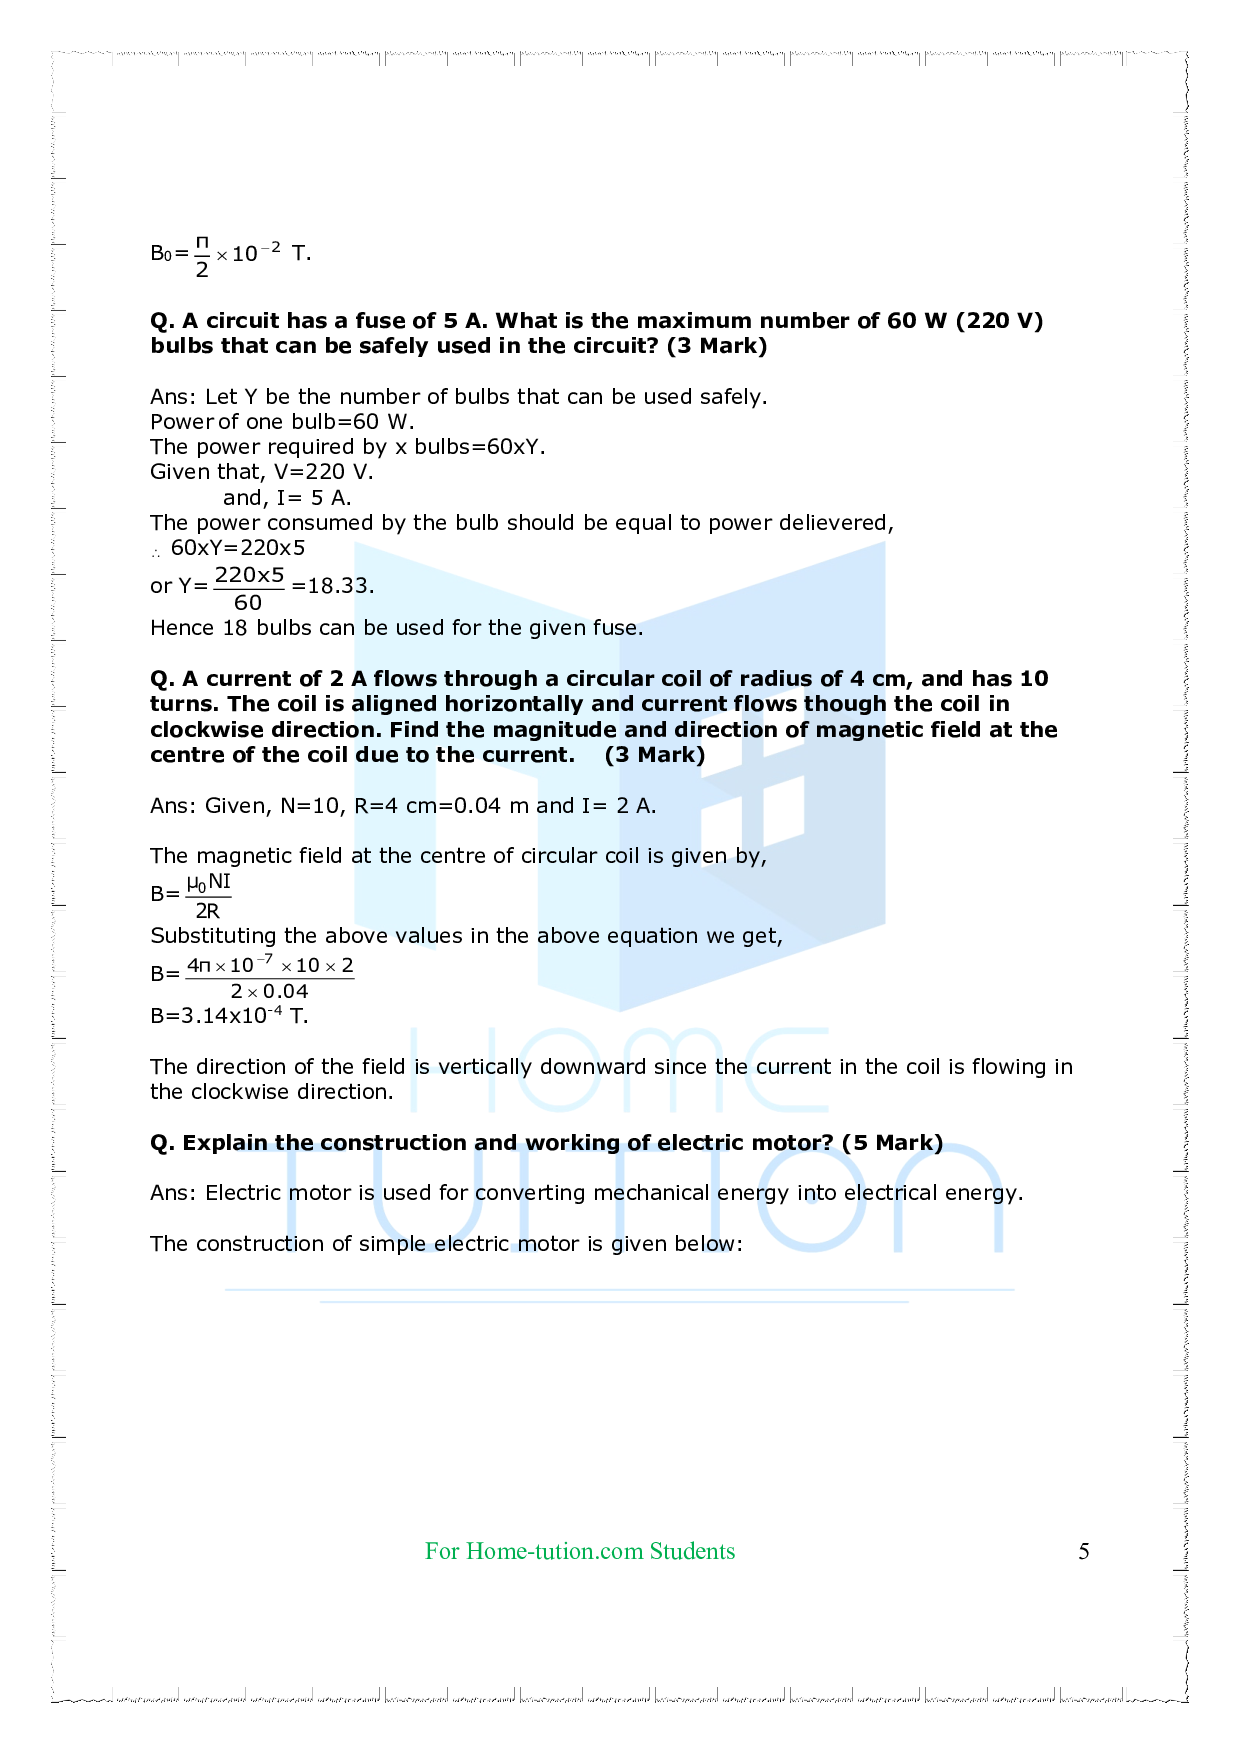 Chapter 13 Magnetic Effects of Electric Current Questions